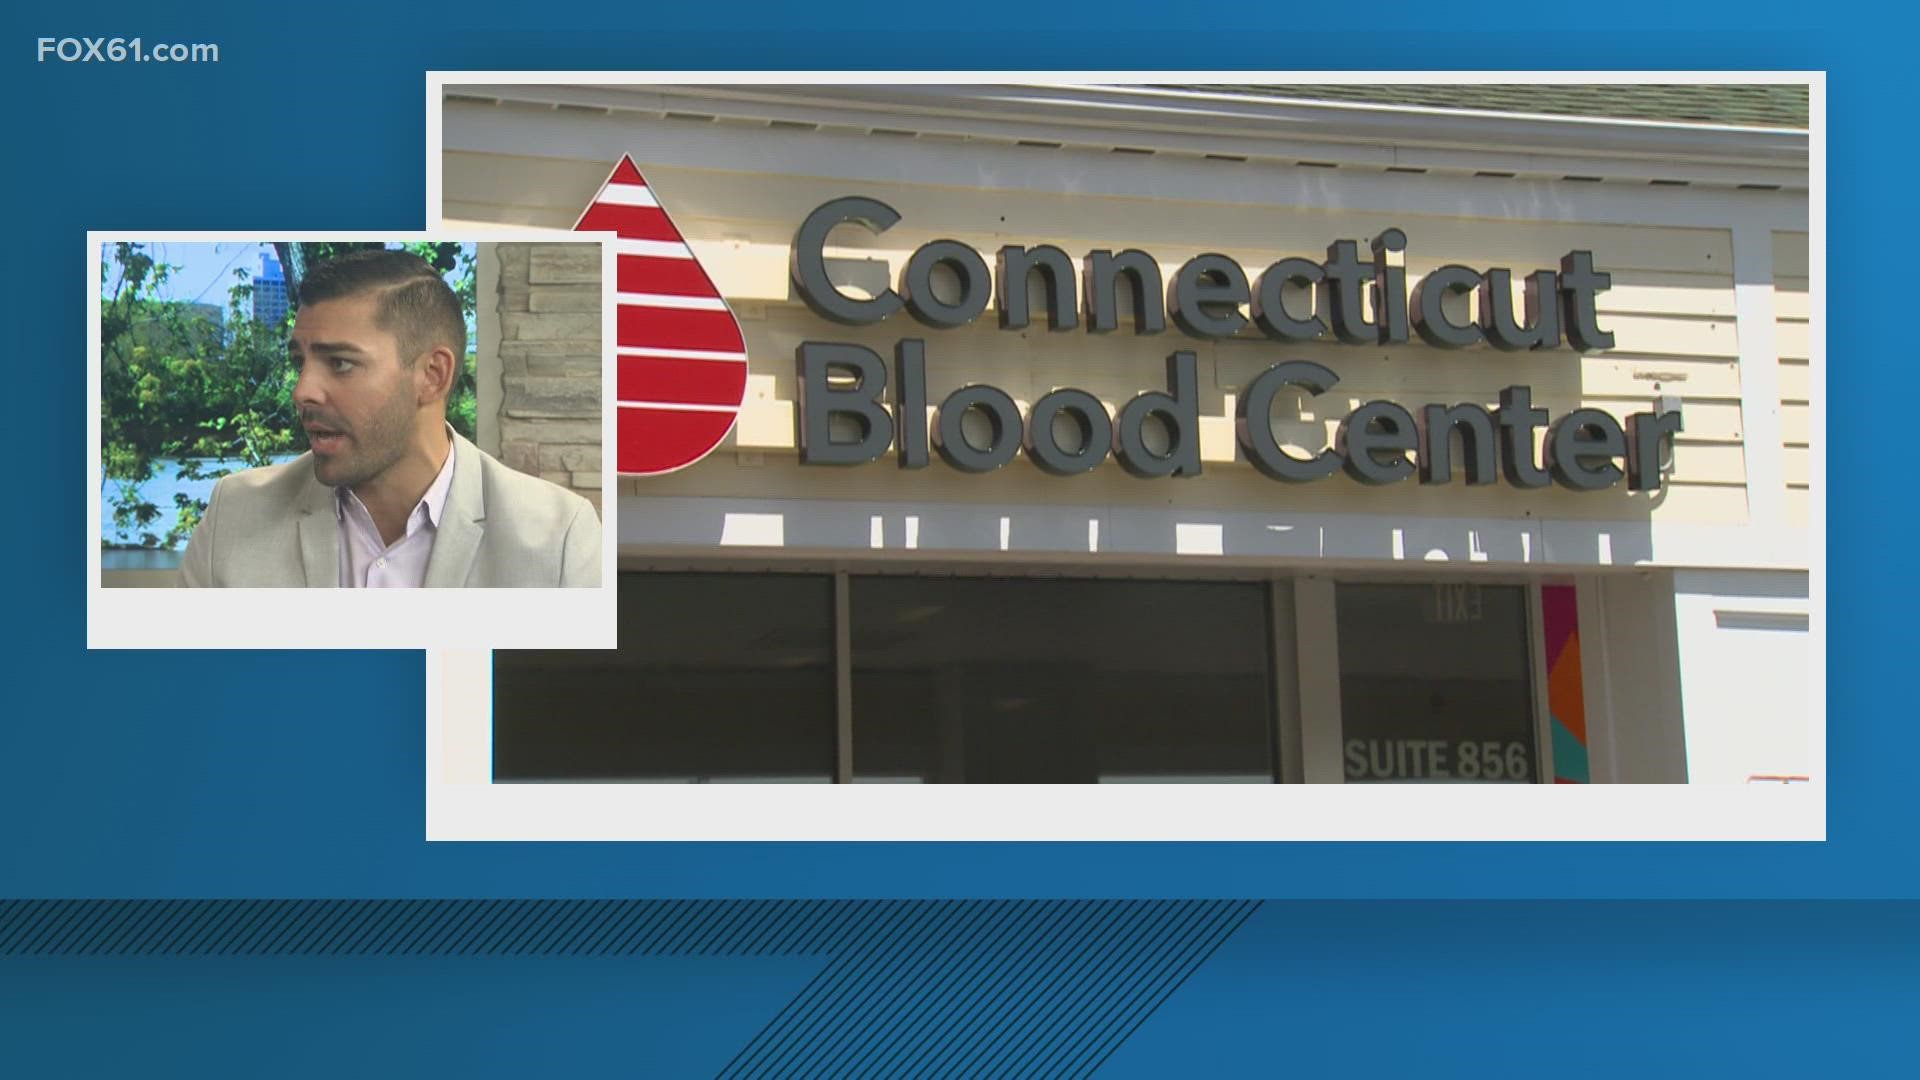 As hospitals and organizations report a blood shortage, The Connecticut Blood Center announced a blood emergency.